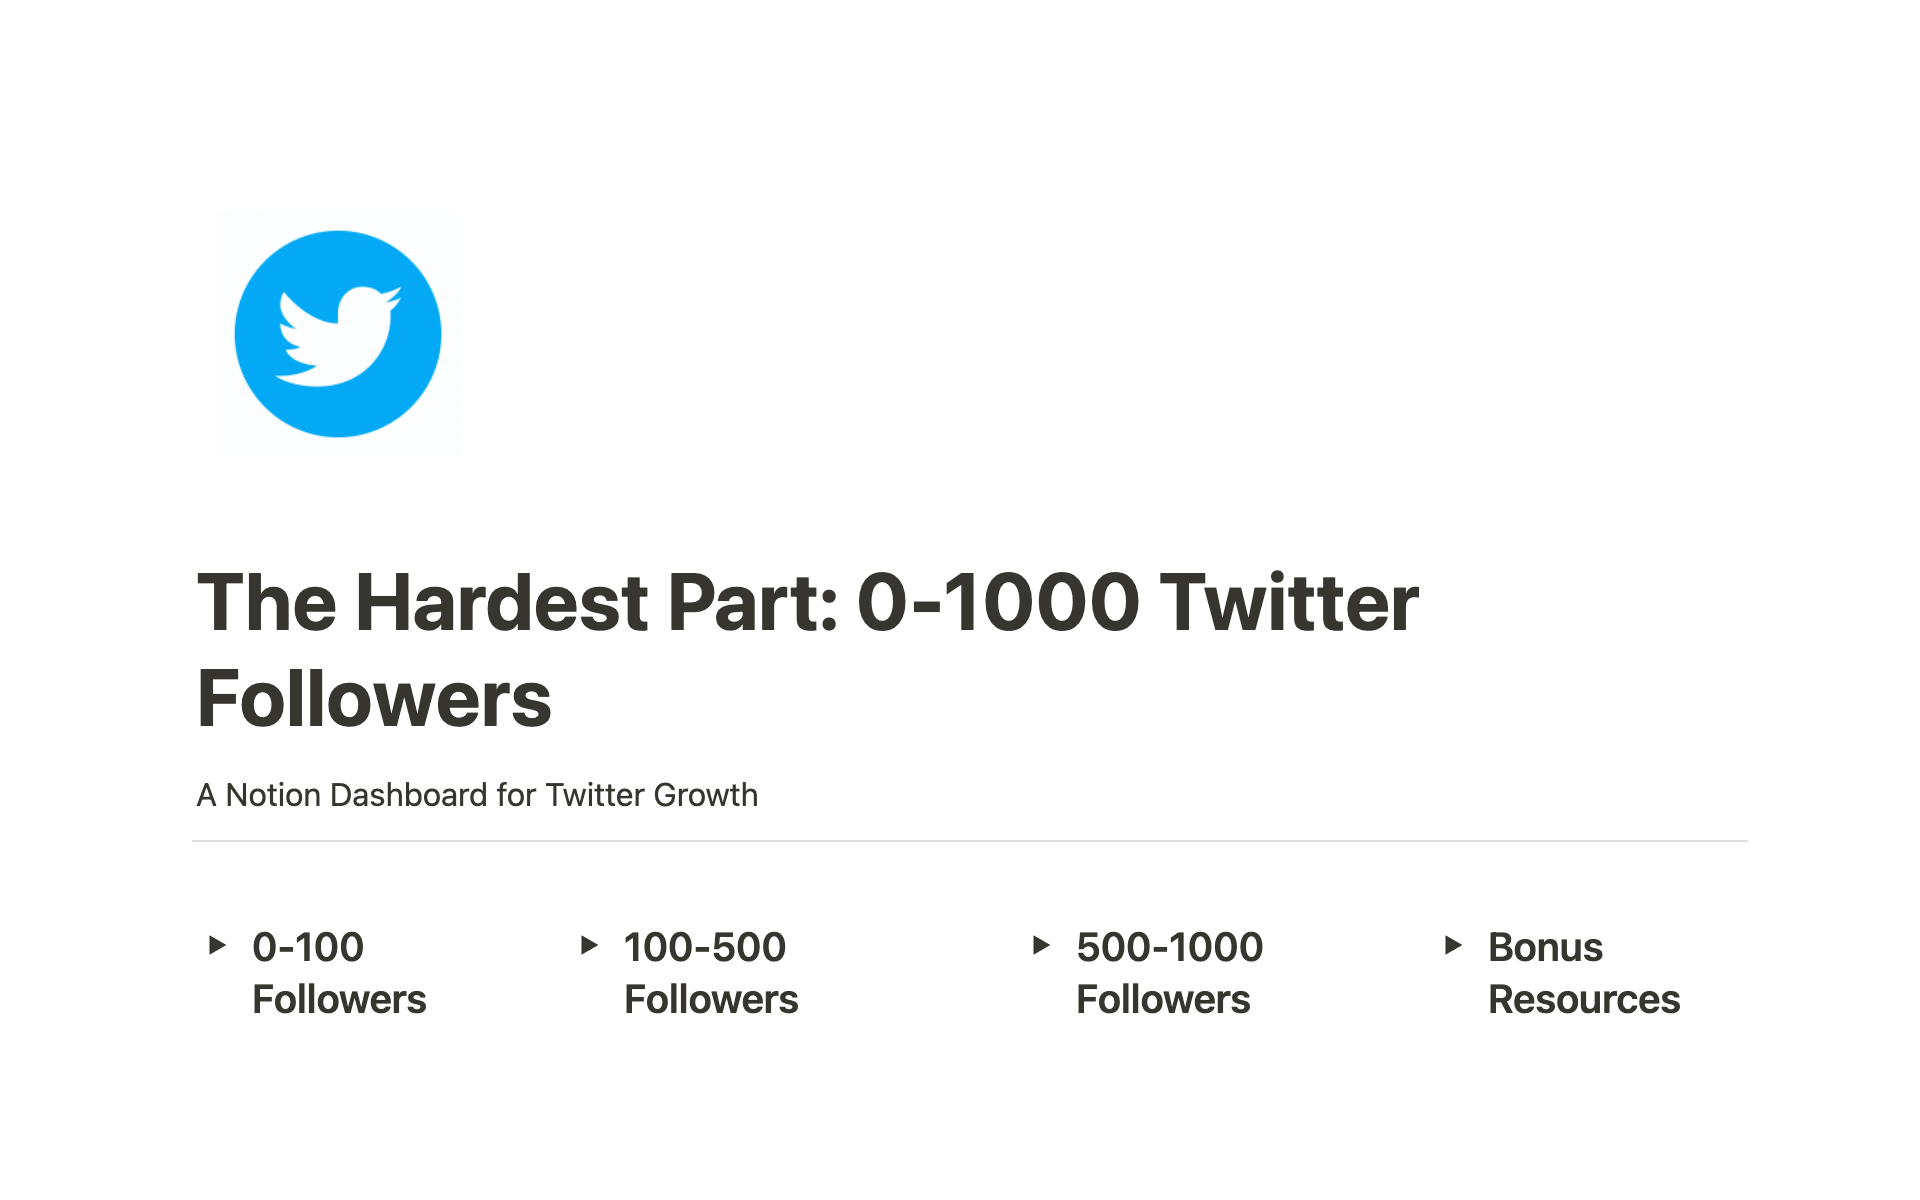 A Notion Dashboard to help you through the hardest part of your Twitter journey